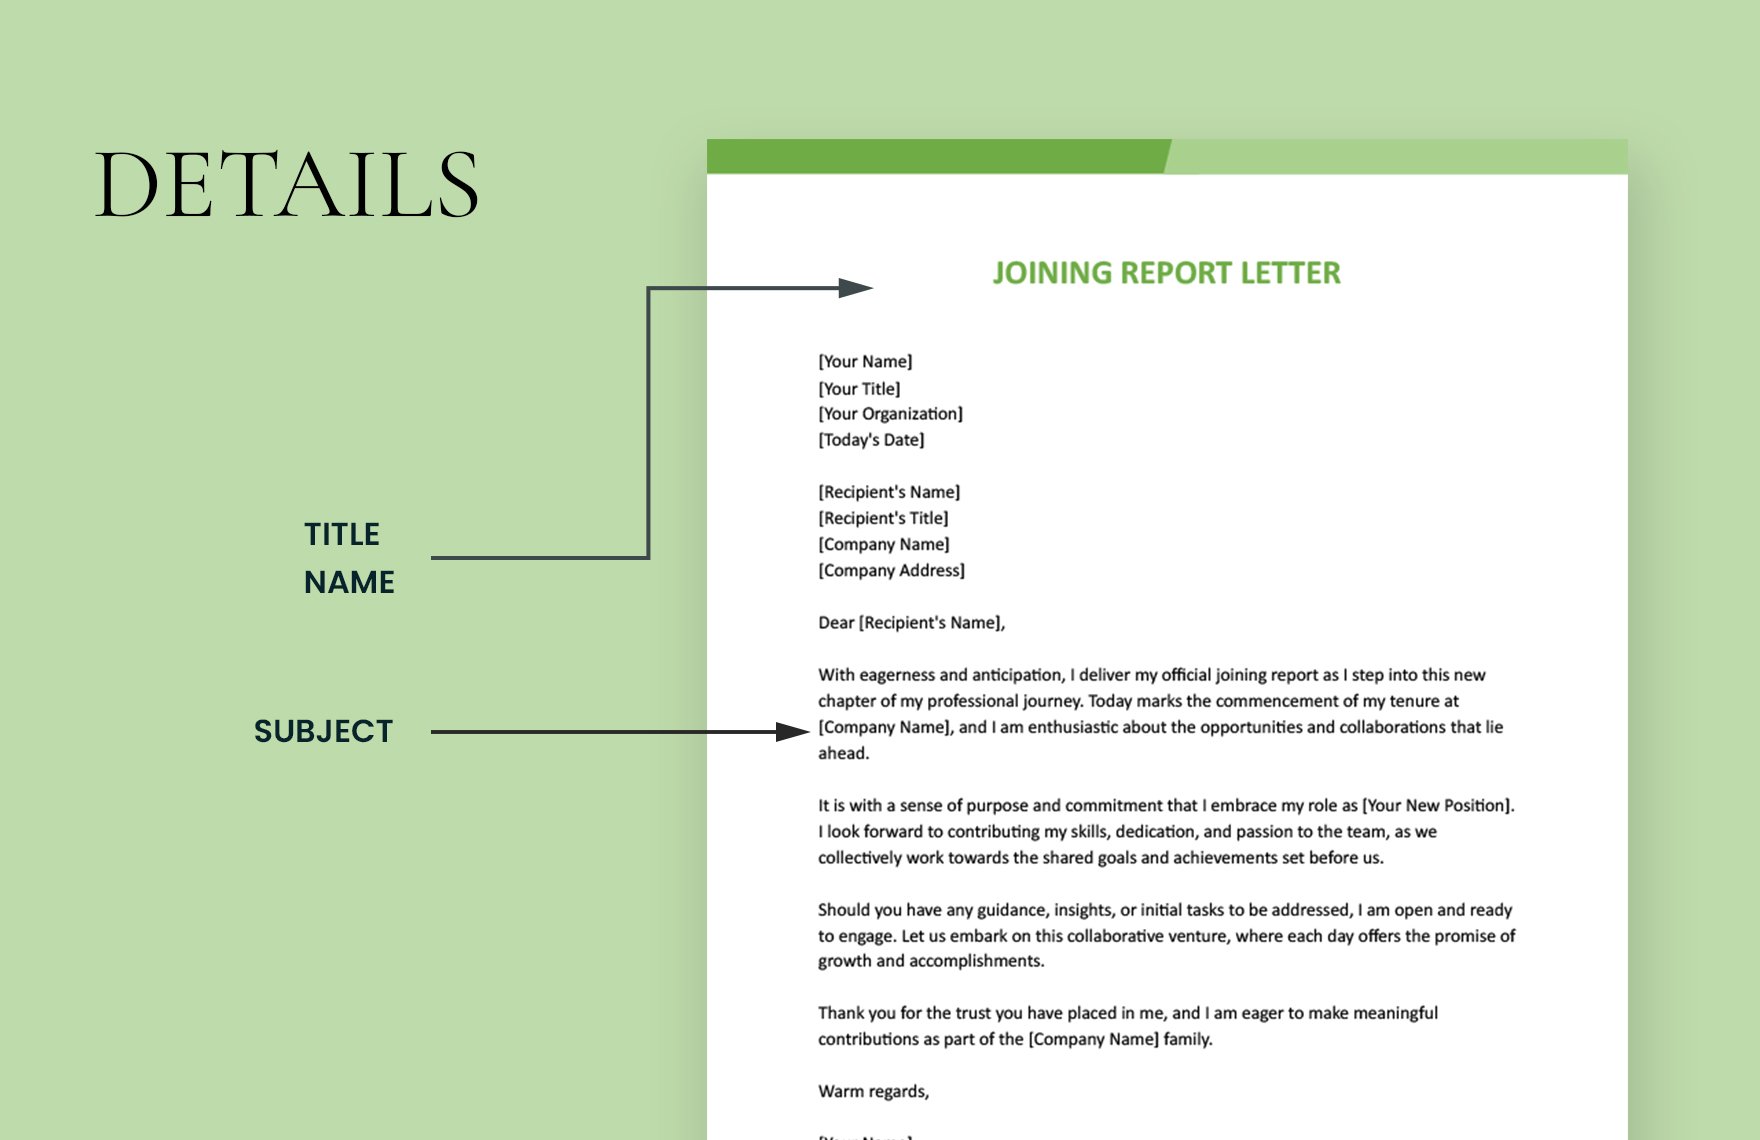 Joining Report Letter